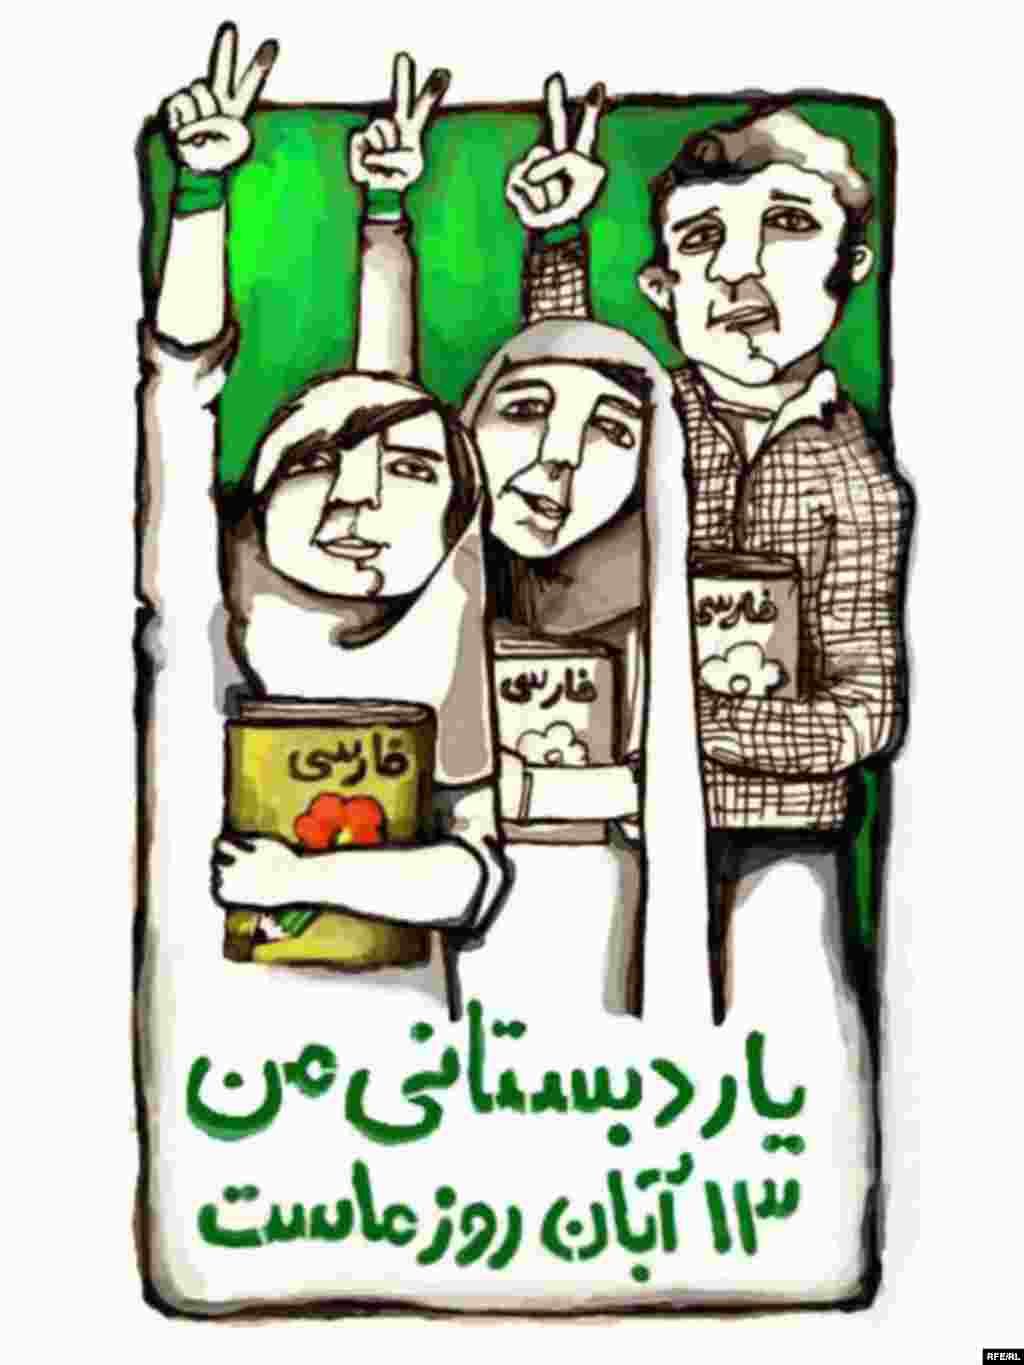 Iran's Election Unrest: An Artist's View #7